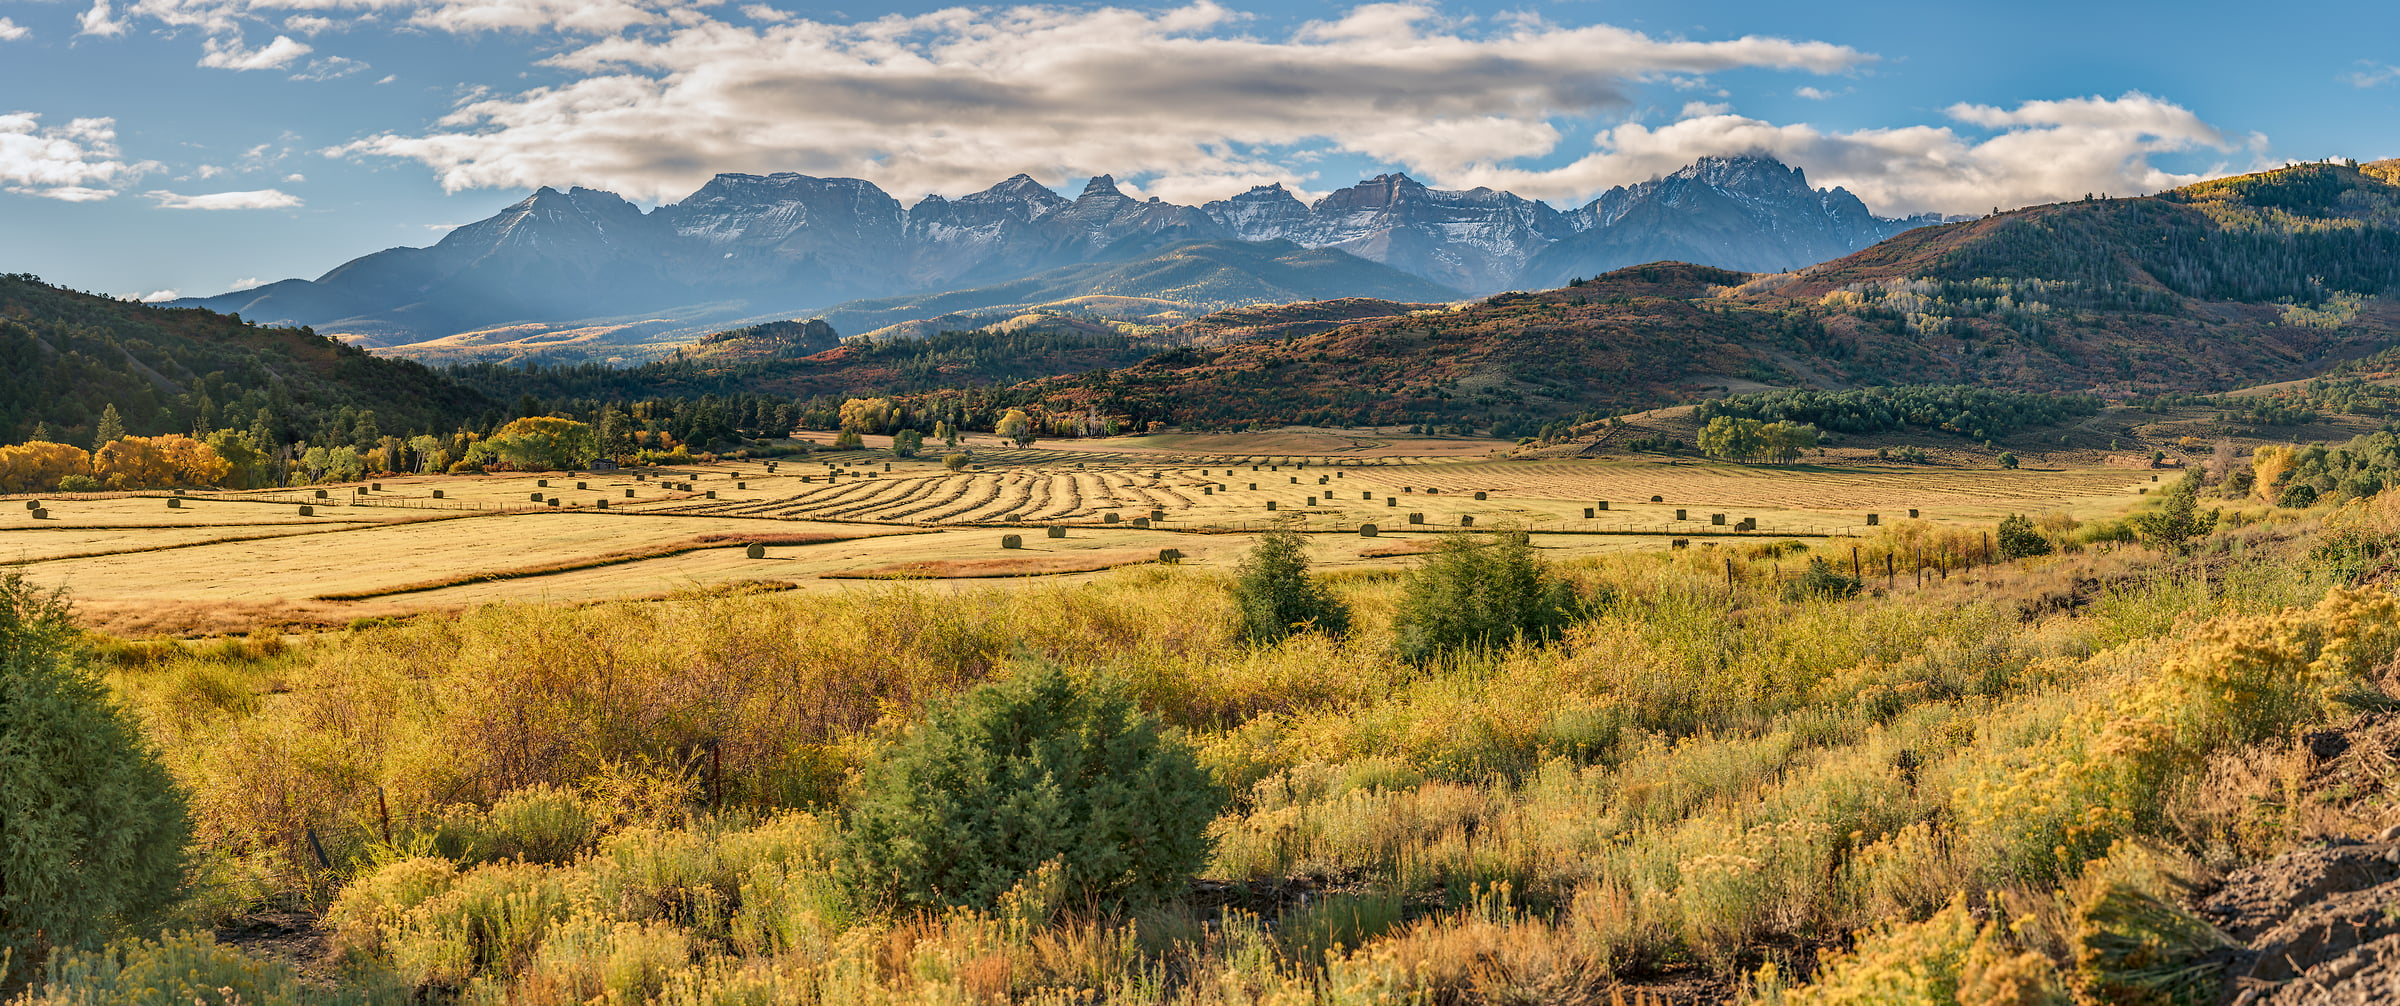 412 megapixels! A very high resolution, large-format VAST photo print of a field and mountain range; landscape photograph created by John Freeman in Last Dollar Road, Ridgway, Colorado.